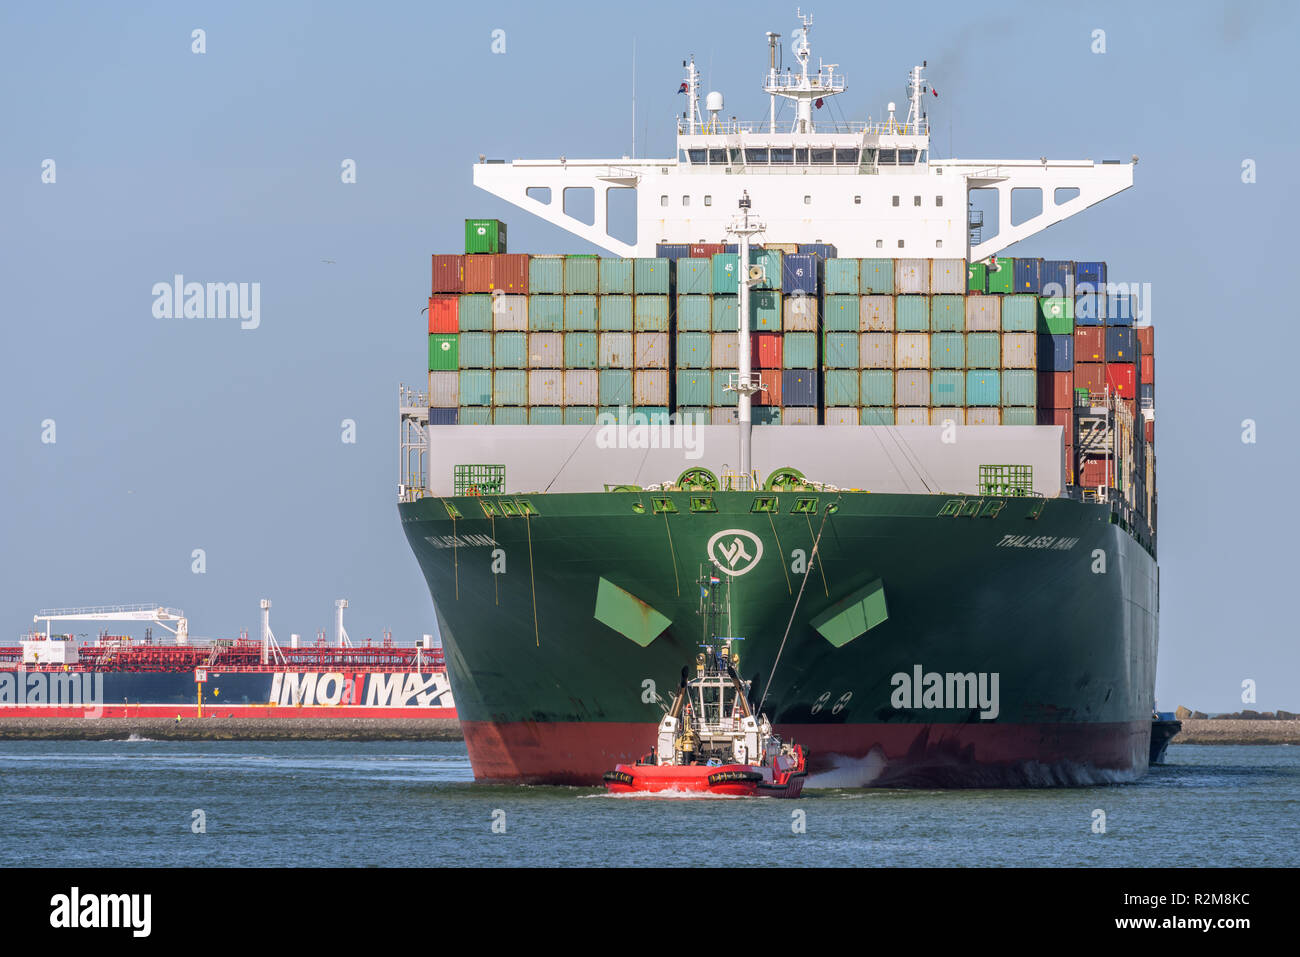 ROTTERDAM, THE NETHERLANDS - FEBRUARY 16, 2018: The large container ship Thalassa Mana is escorted by a tug at its arrival at the Maasvlakte, Port of  Stock Photo